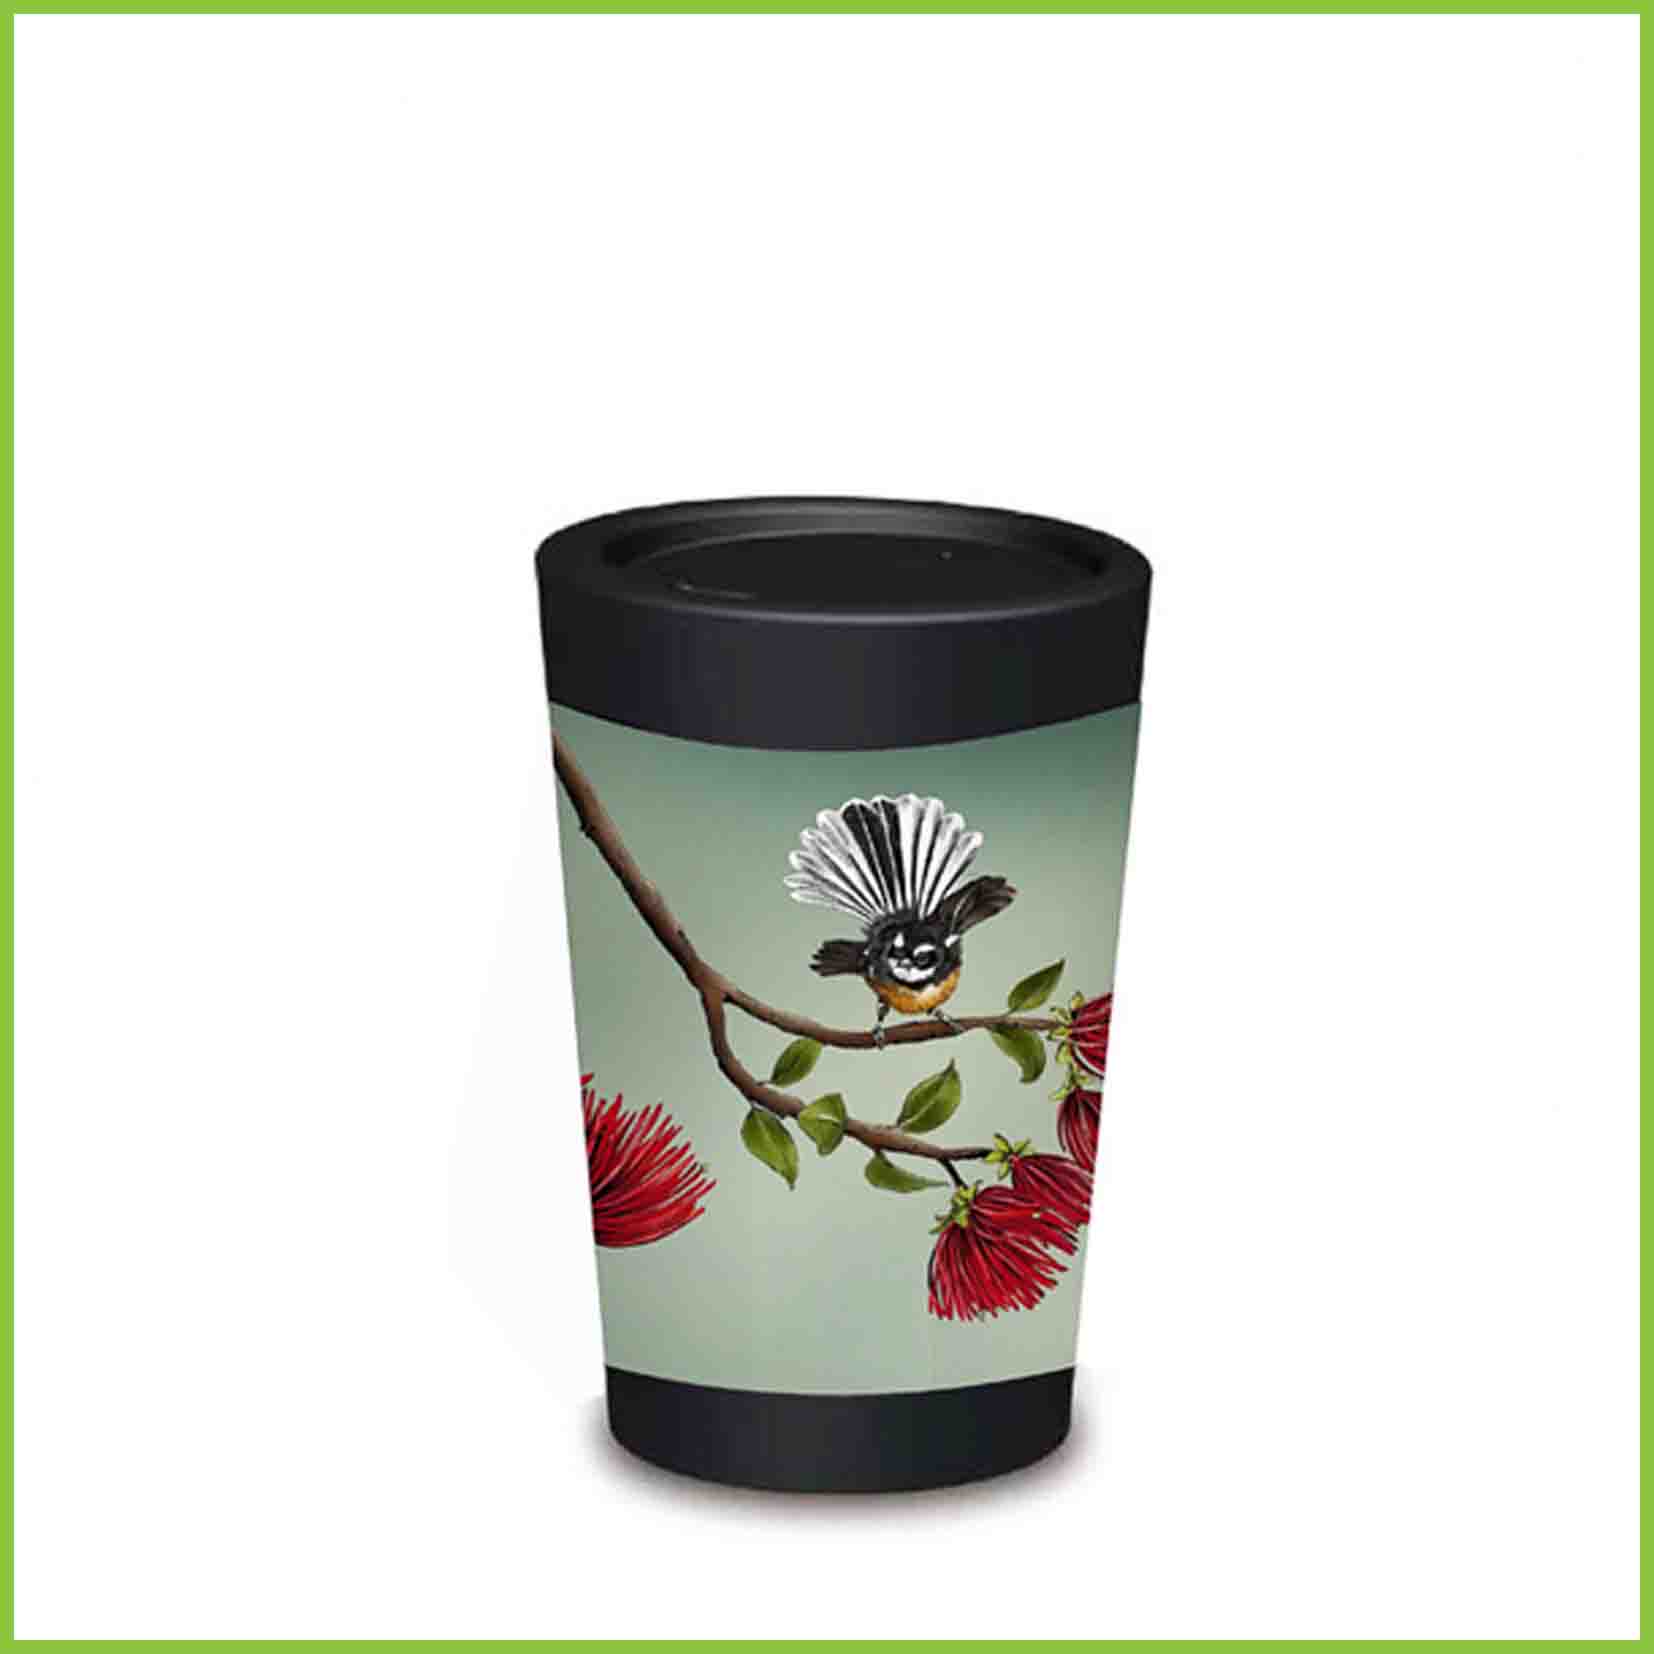 A lightweight reusable cup from CuppaCoffeeCup with a Fantail and Pohutukawa design.